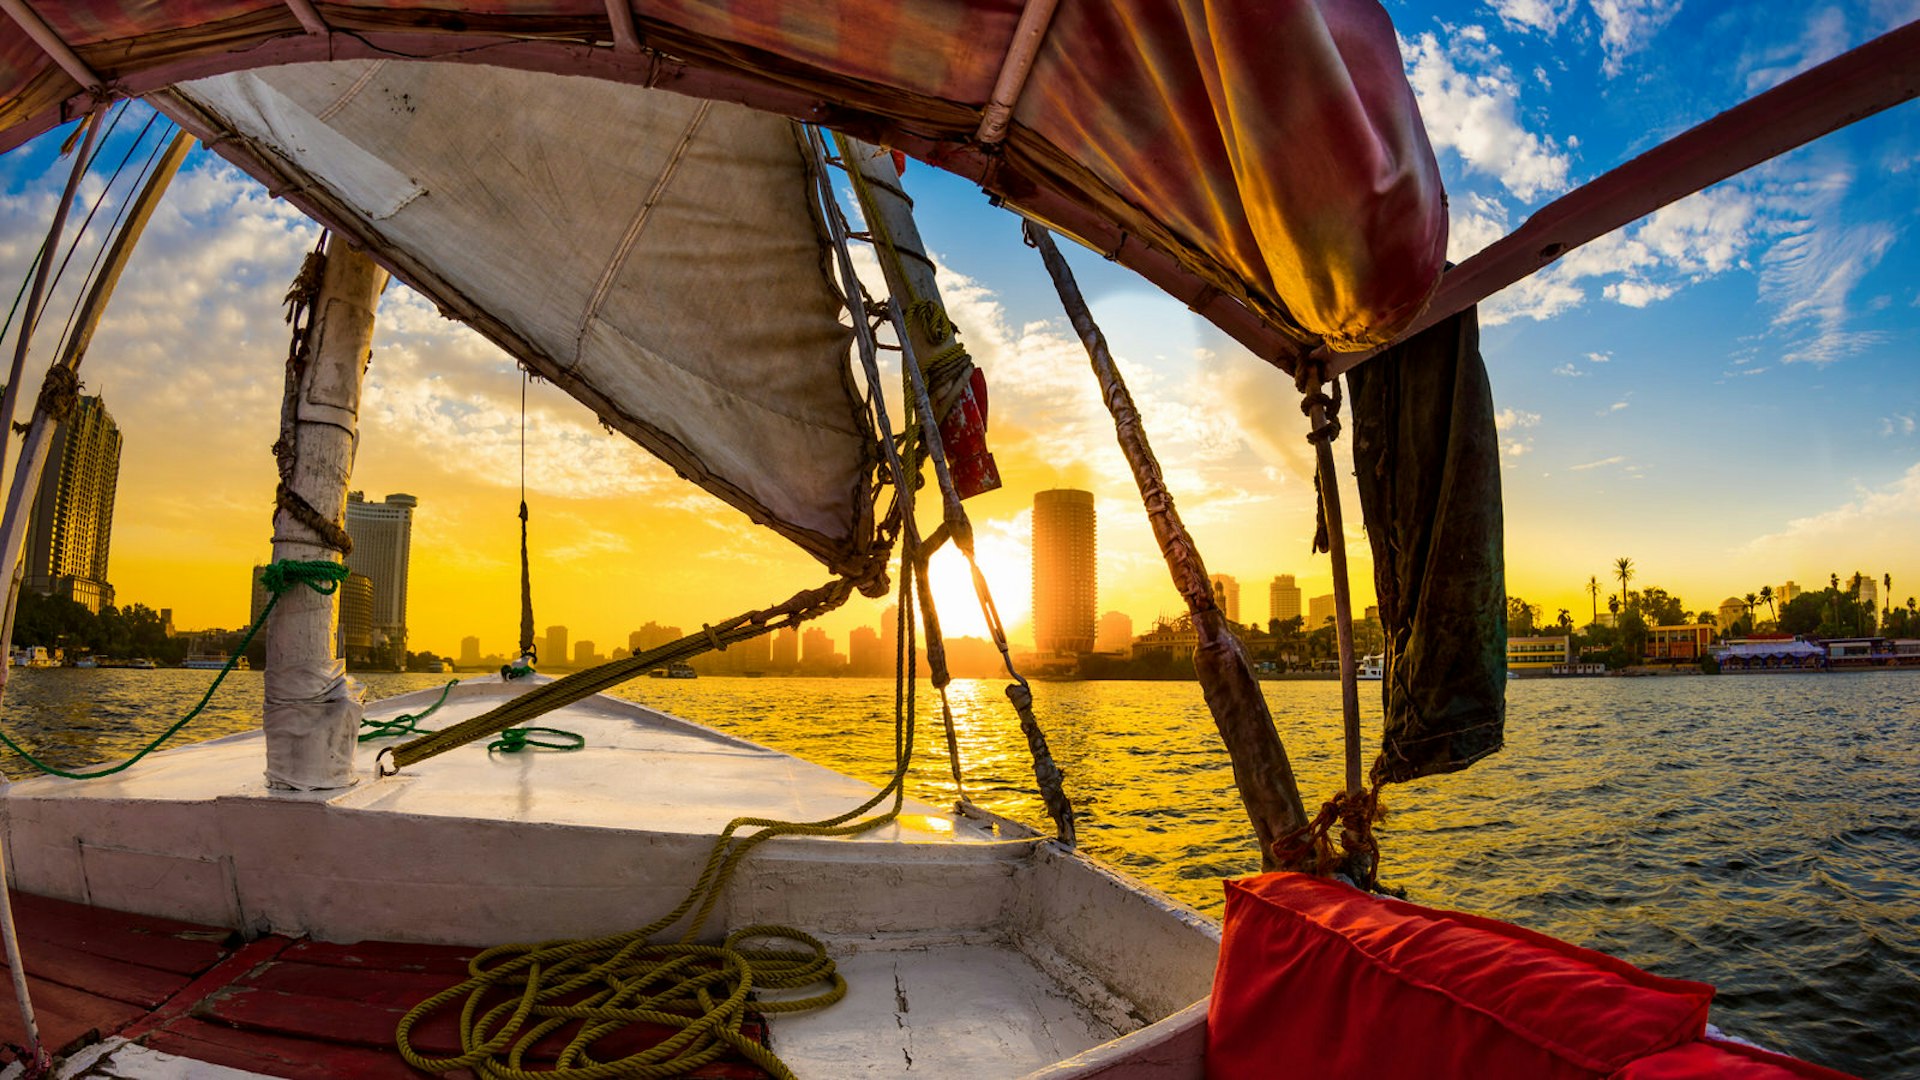 Felucca ride on the Nile, Cairo, Egypt. Image by Guenter Albers / Shutterstock